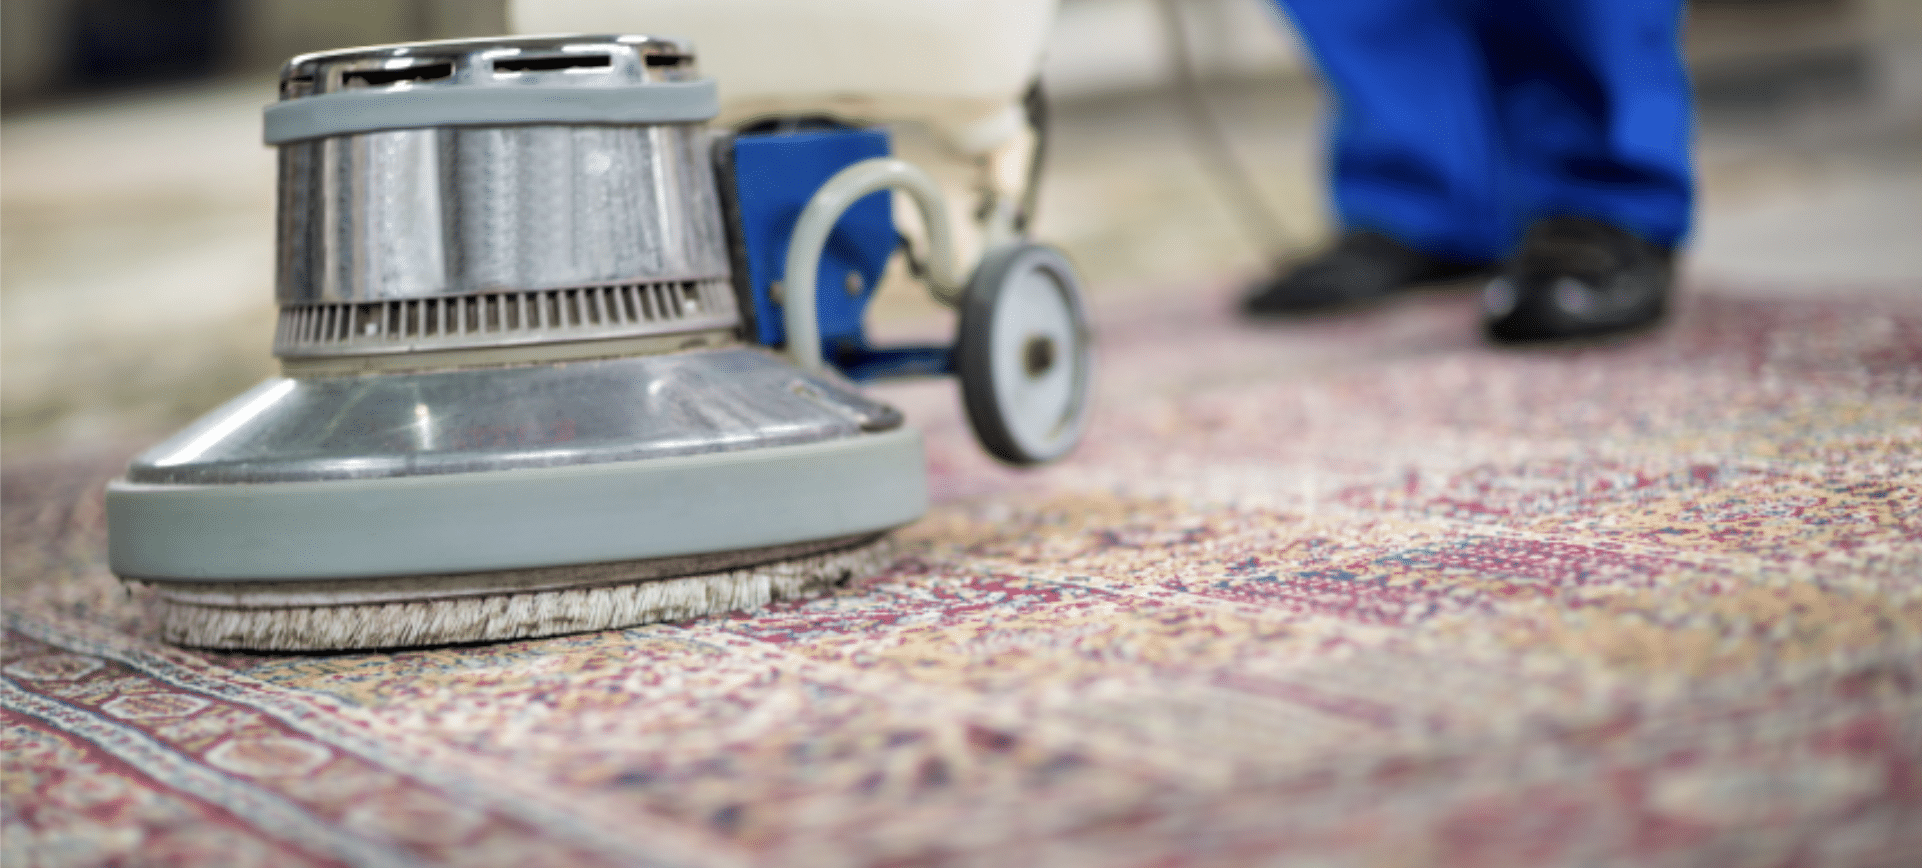 A Step Above rug cleaning with the machine in the front and a persons feet blurred in the back.